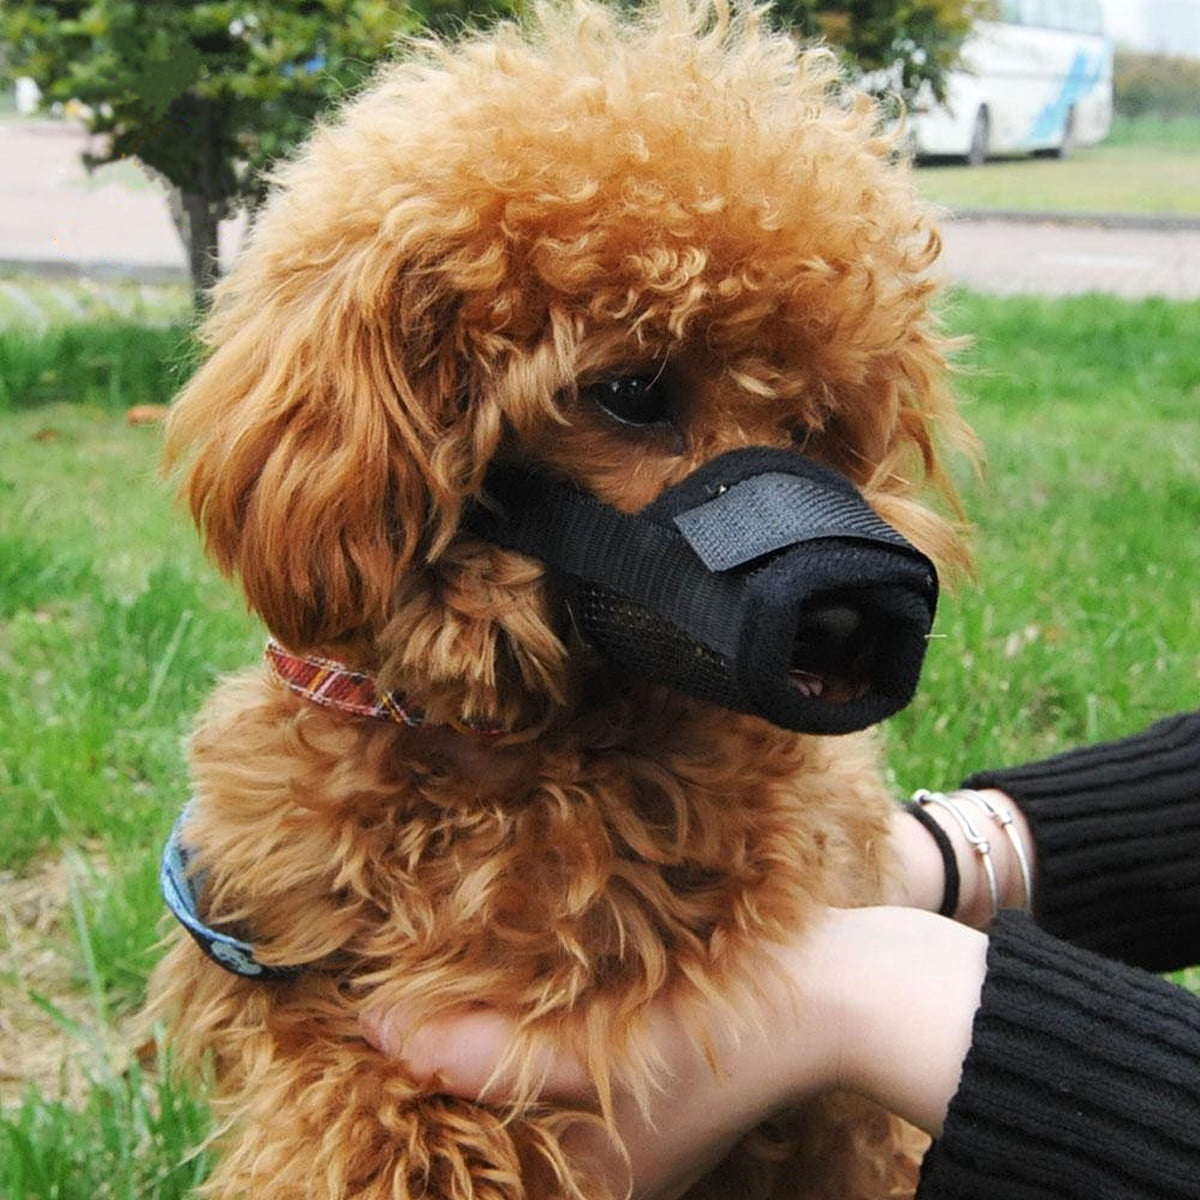 muzzle for toy poodle